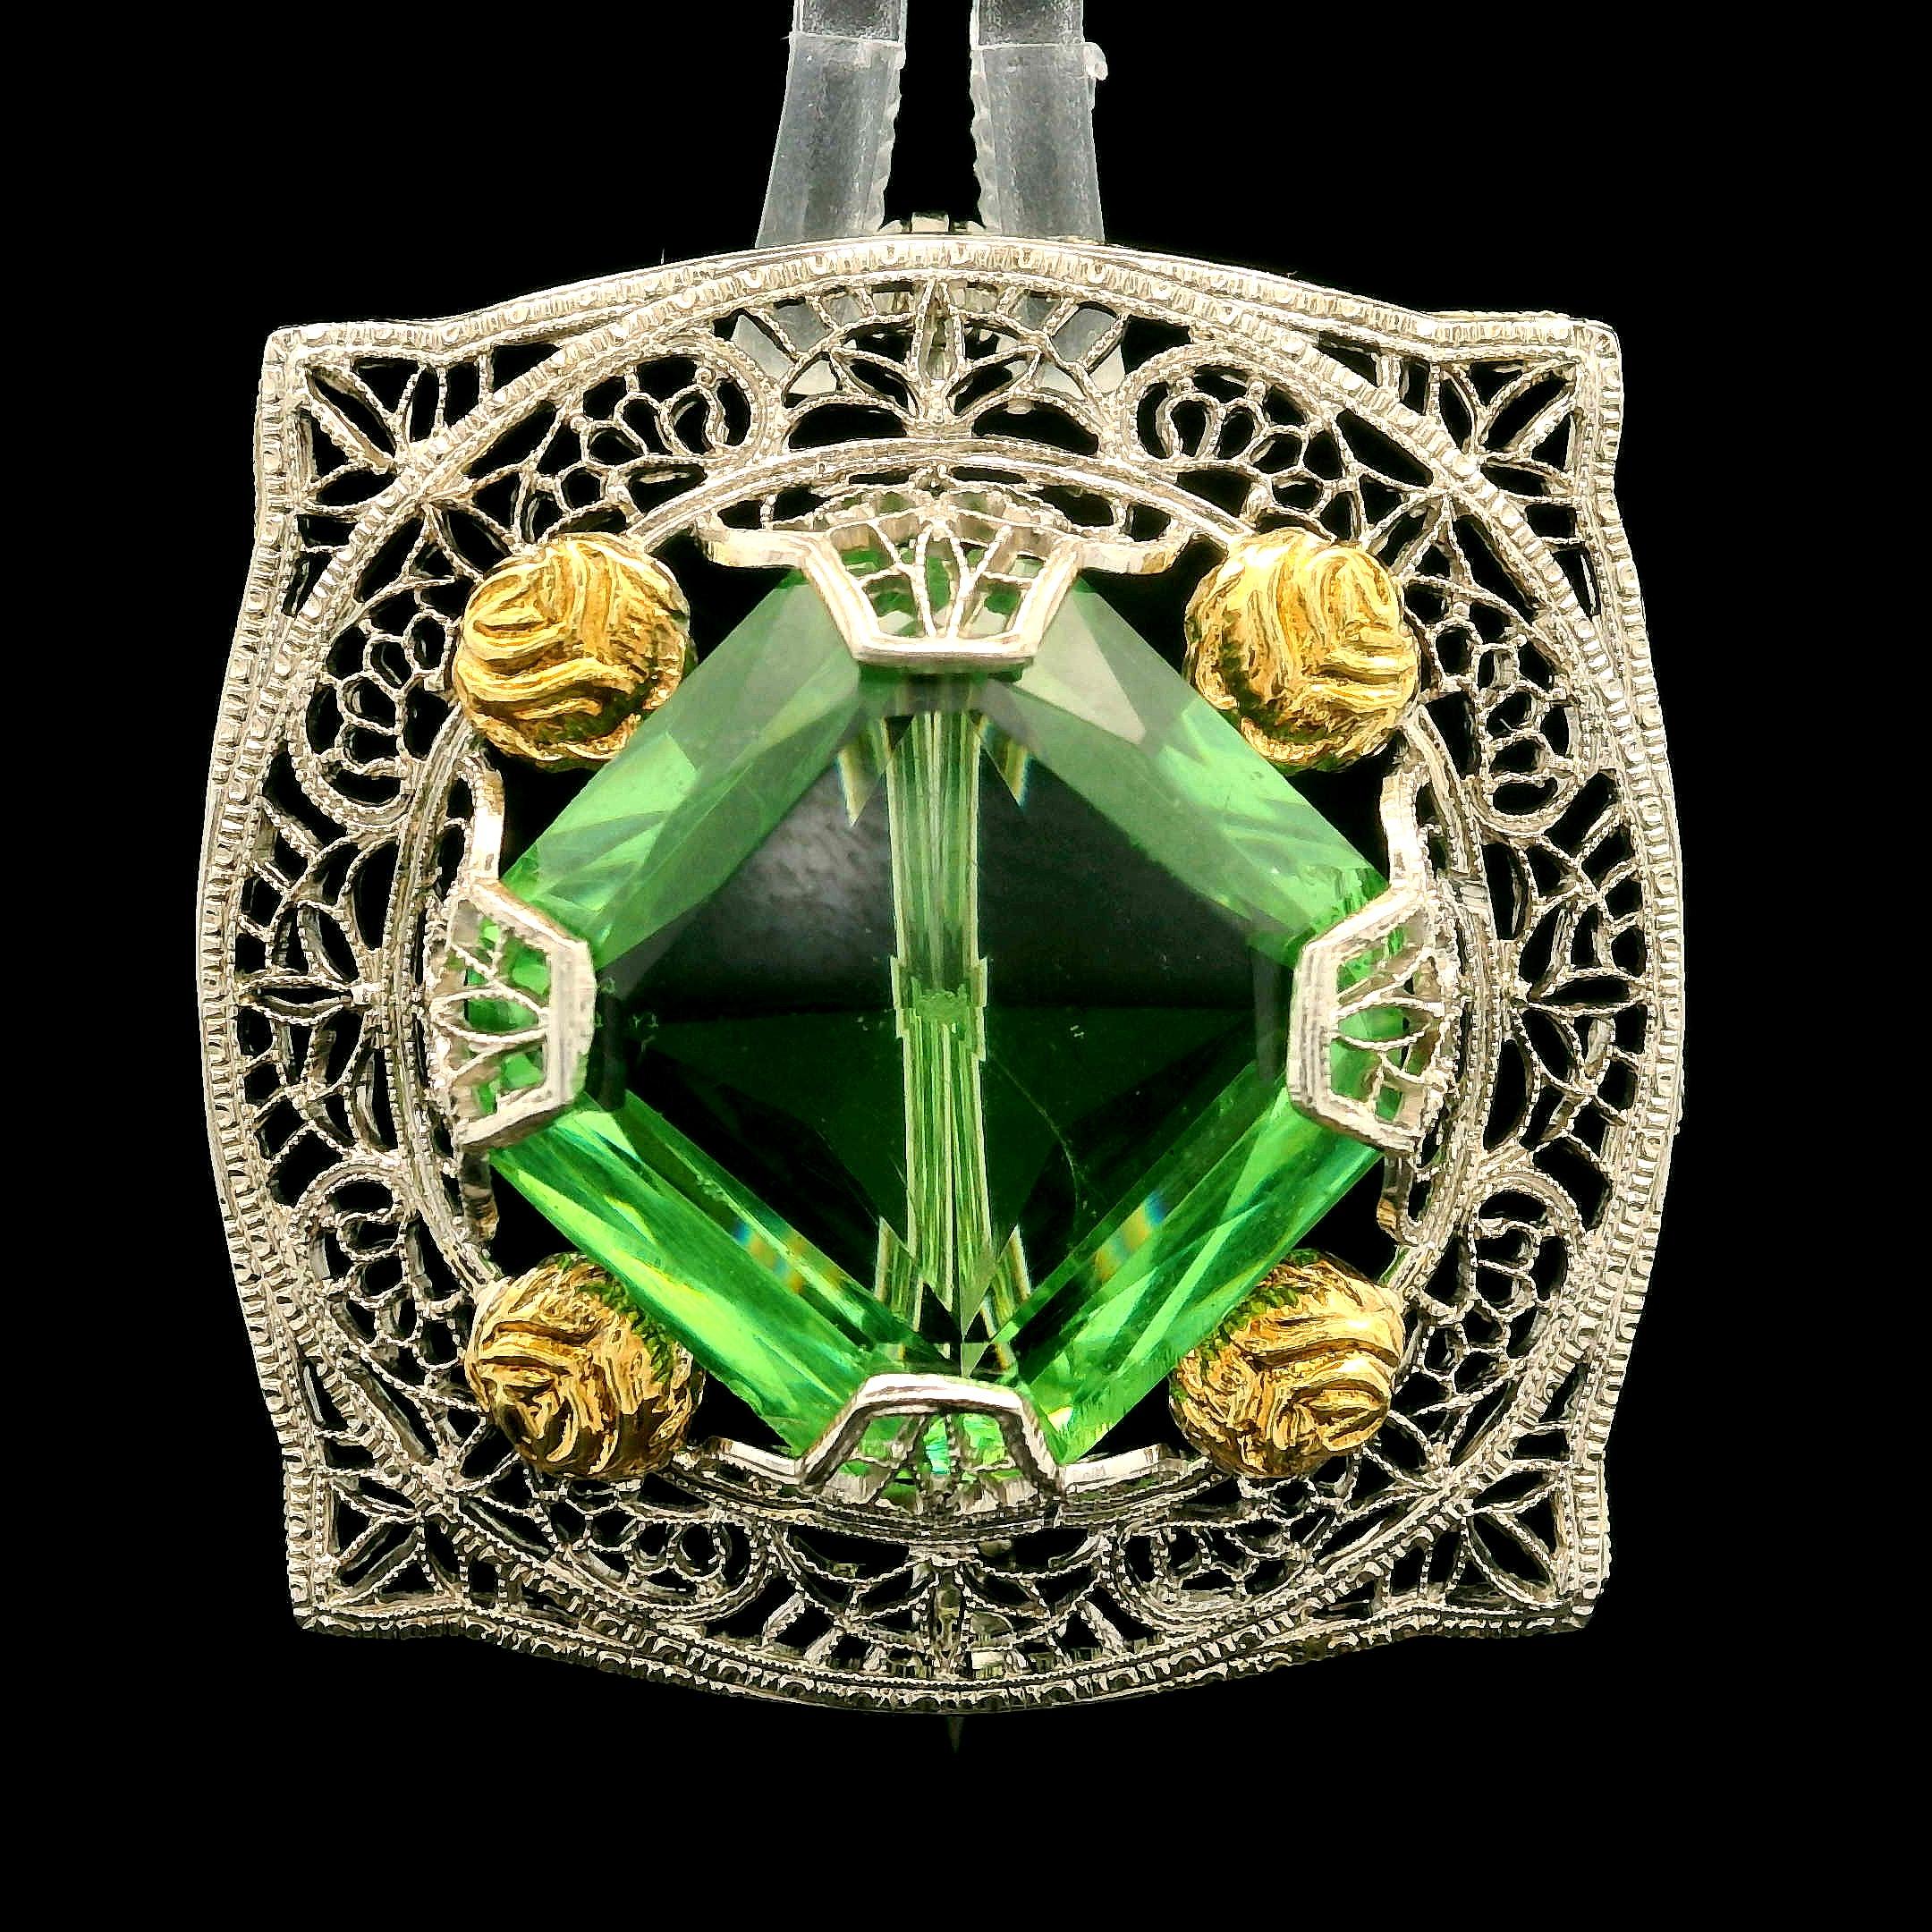 Antique Art Deco 10k White Gold Lab Grown Green Stone Filigree Brooch Pin For Sale 1